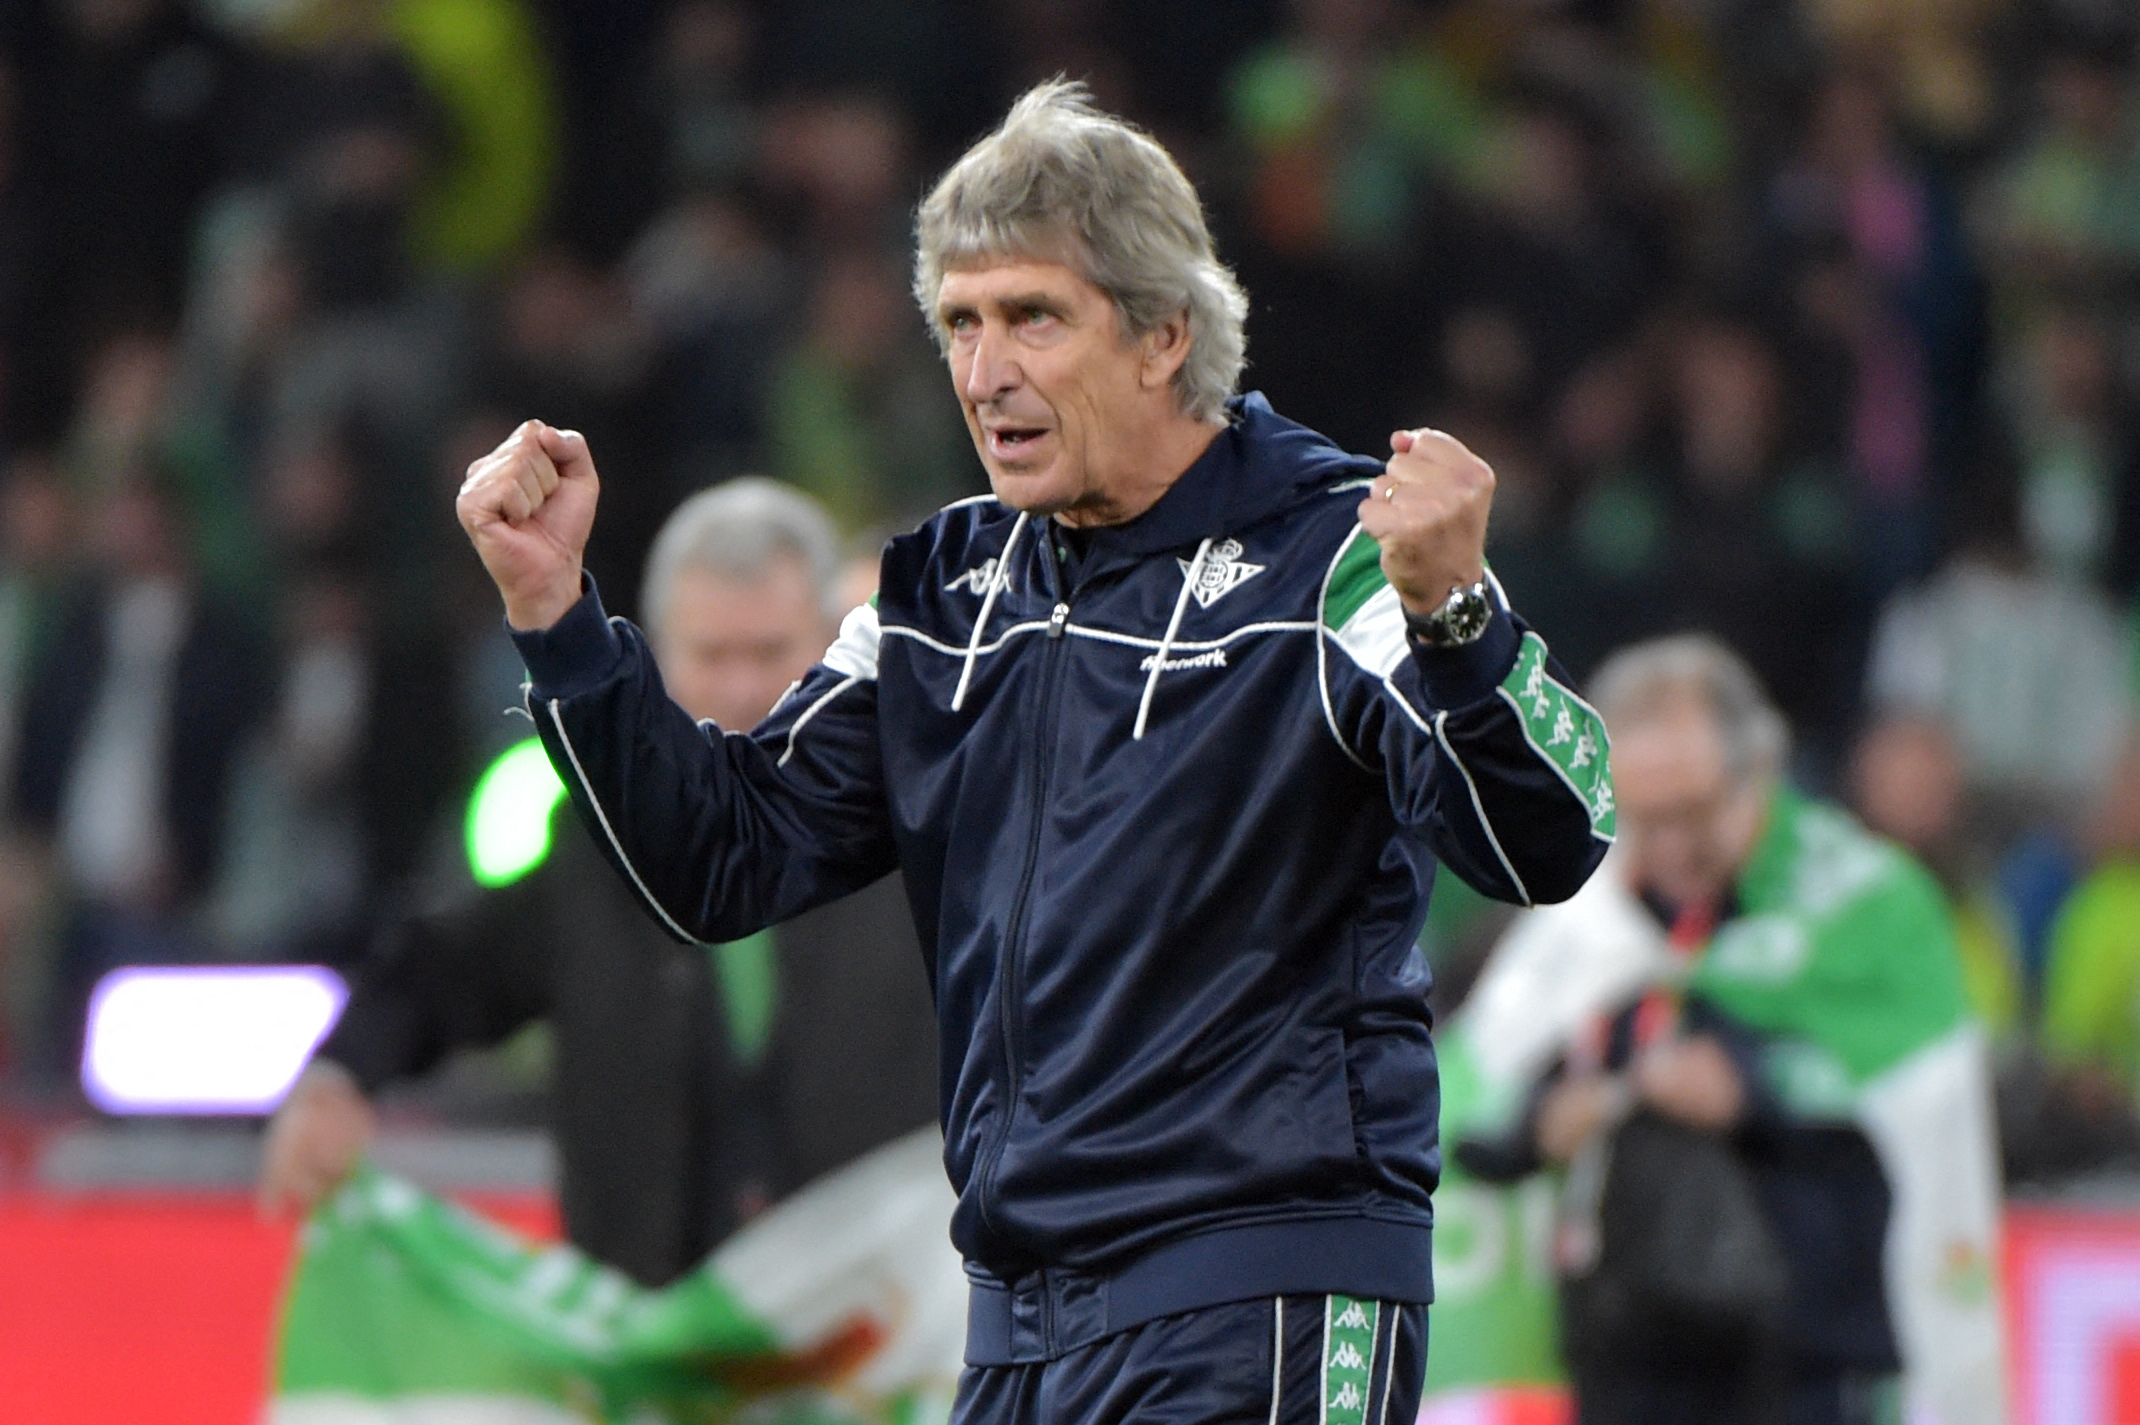 Real Betis' Chilean coach Manuel Pellegrini celebrates their victory after the Spanish Copa del Rey (King's Cup) final football match between Real Betis and Valencia CF at La Cartuja Stadium in Seville, on April 23, 2022. (Photo by CRISTINA QUICLER / AFP) (Photo by CRISTINA QUICLER/AFP via Getty Images)